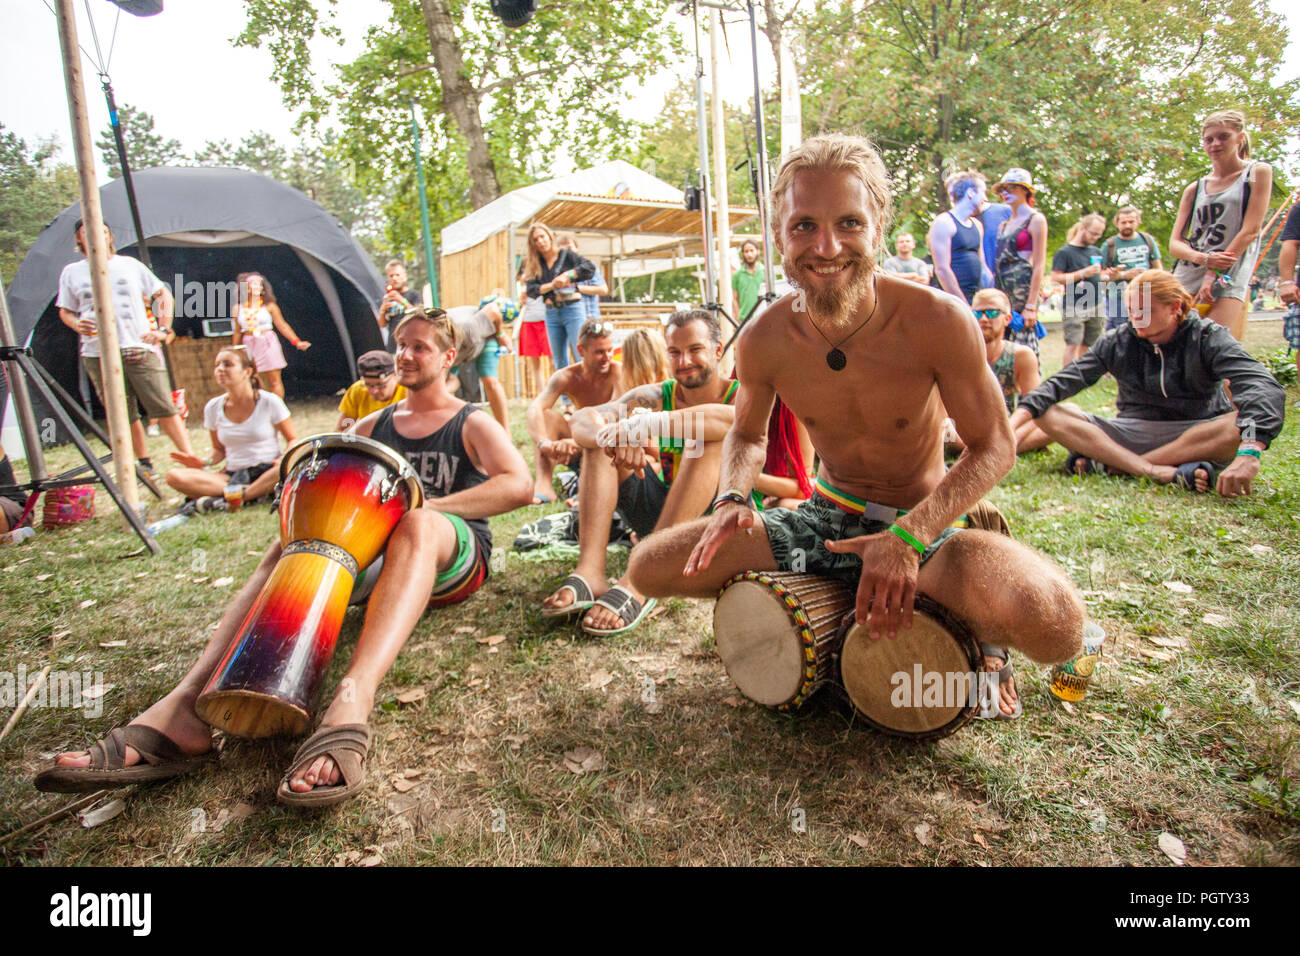 Bratislava, Slovakia. 24th August, 2018. Visitors to the Uprising Music Festival drum and enjoy their time. Stock Photo